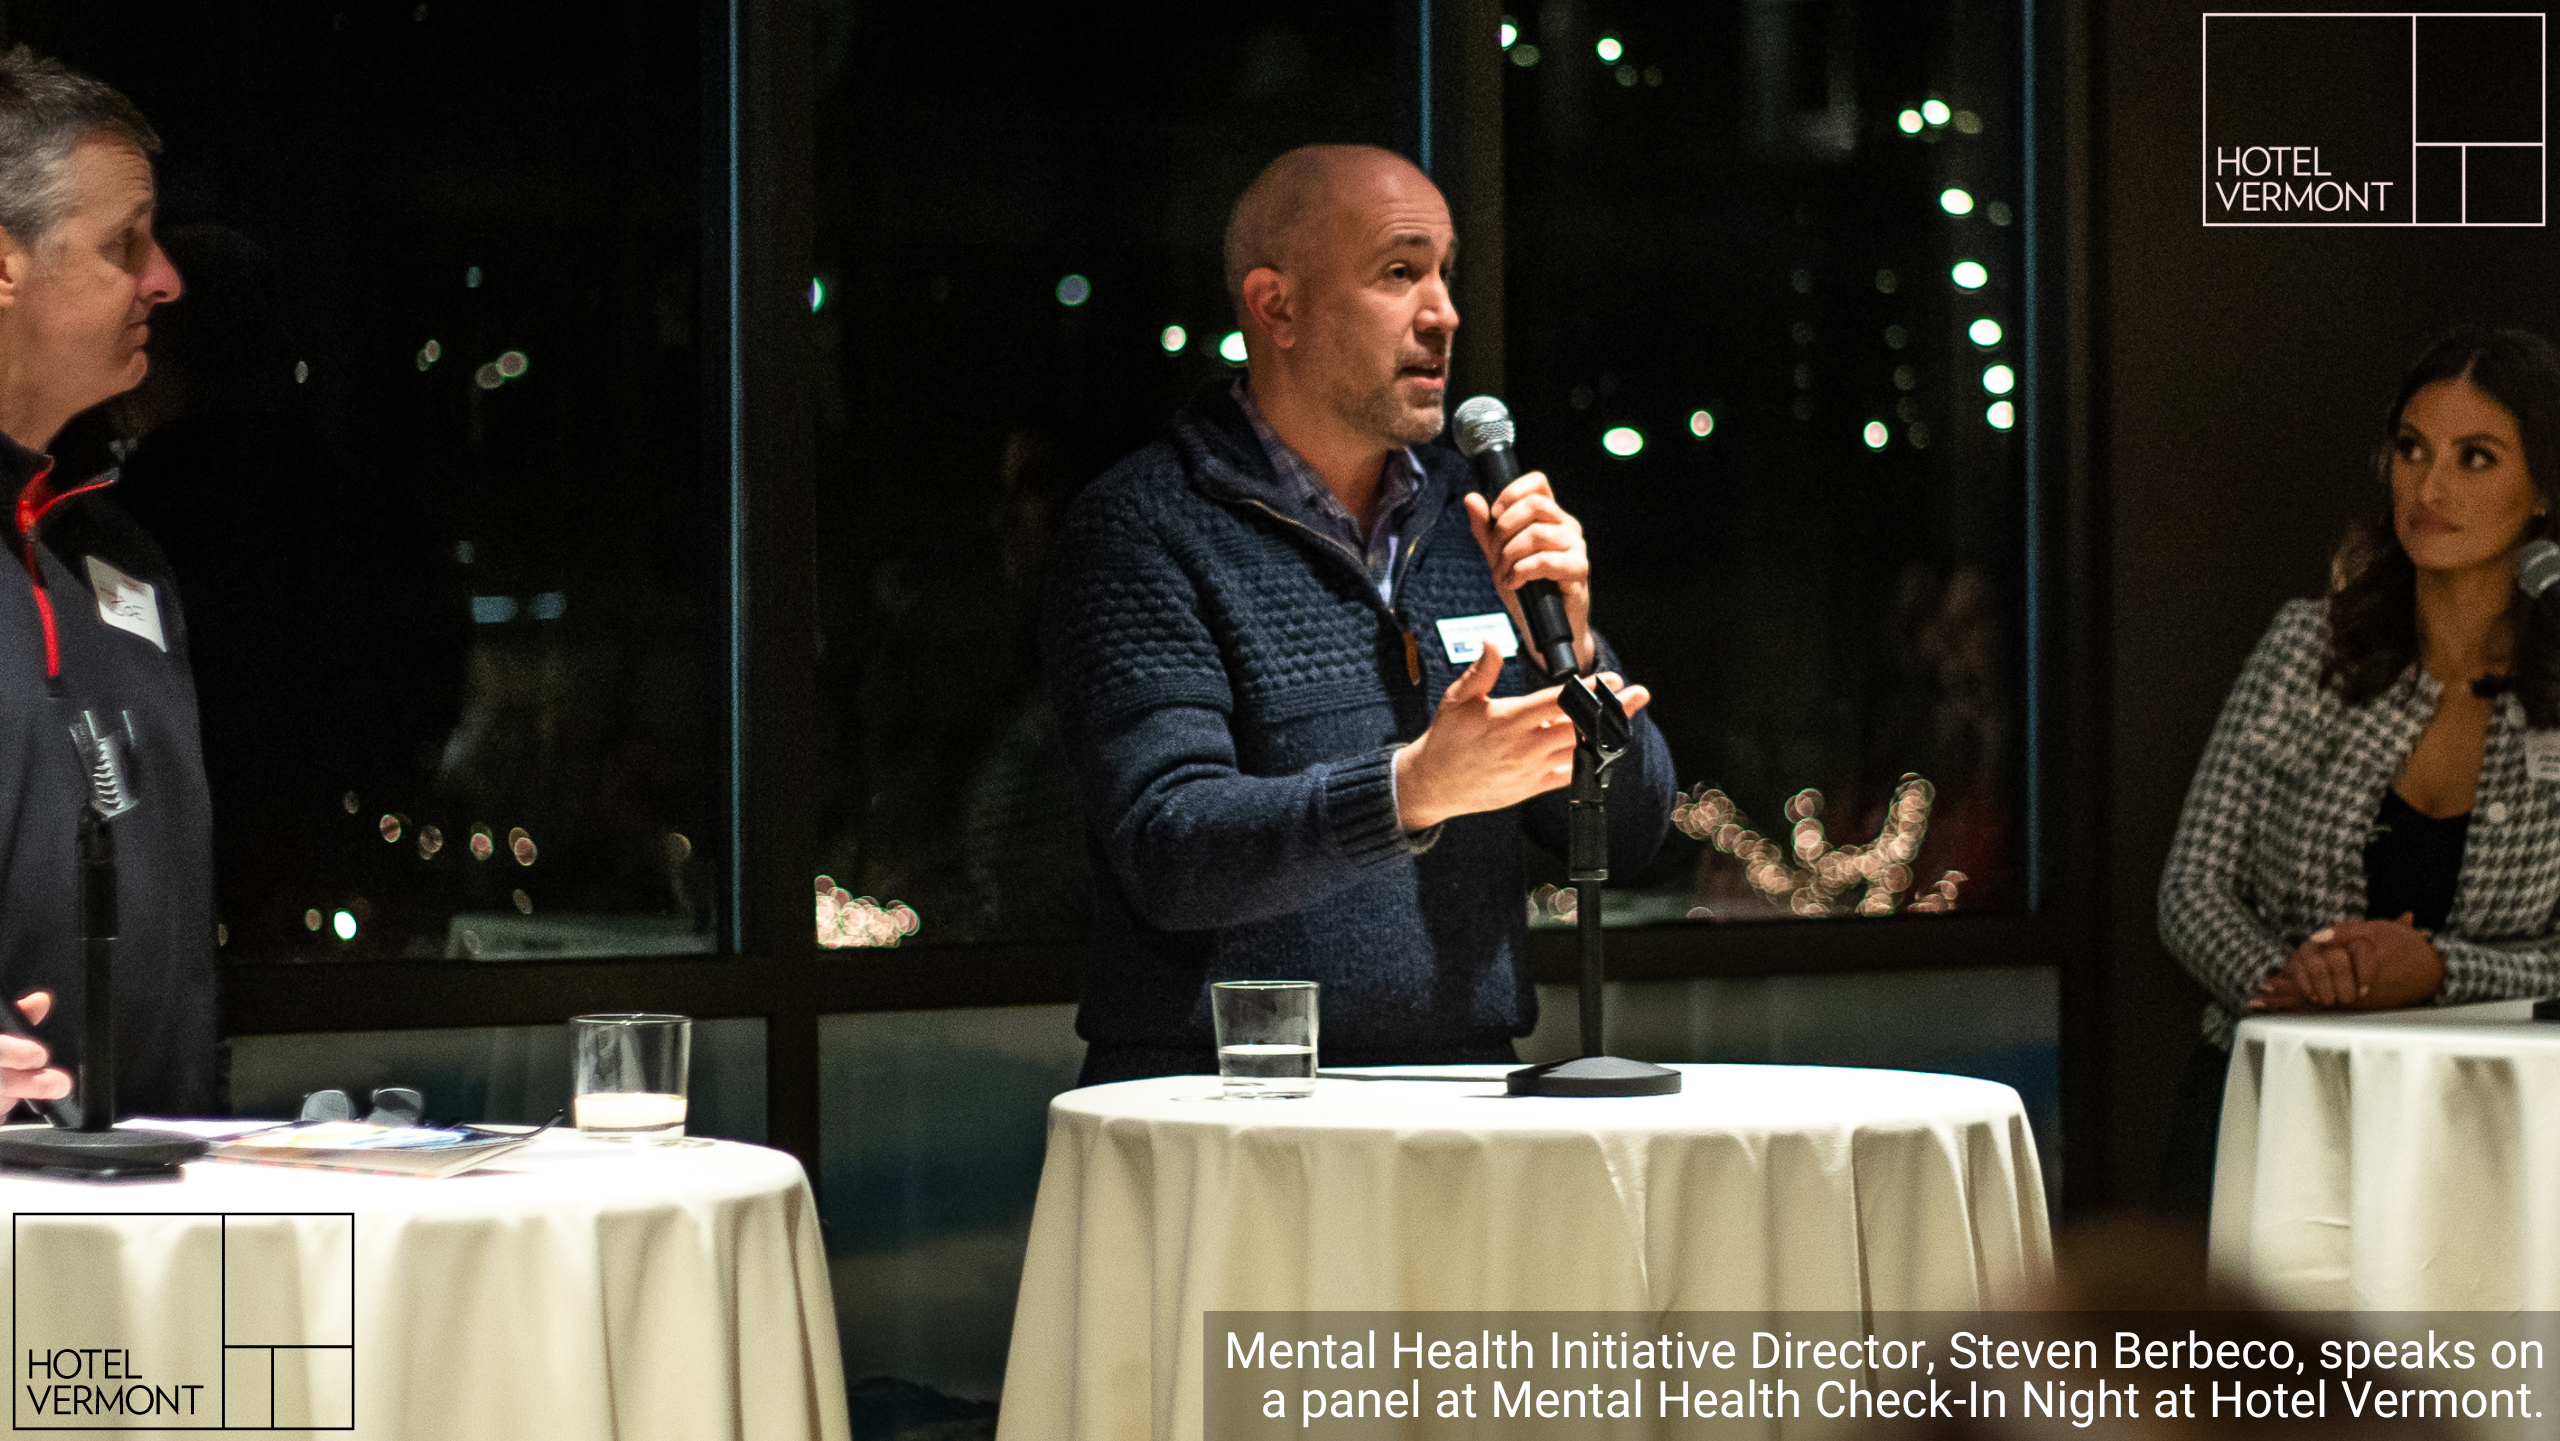 United Way Mental Health Initiative Director Steven Berbeco speaks on a panel at Hotel Vermont's Mental Health Check-in Night